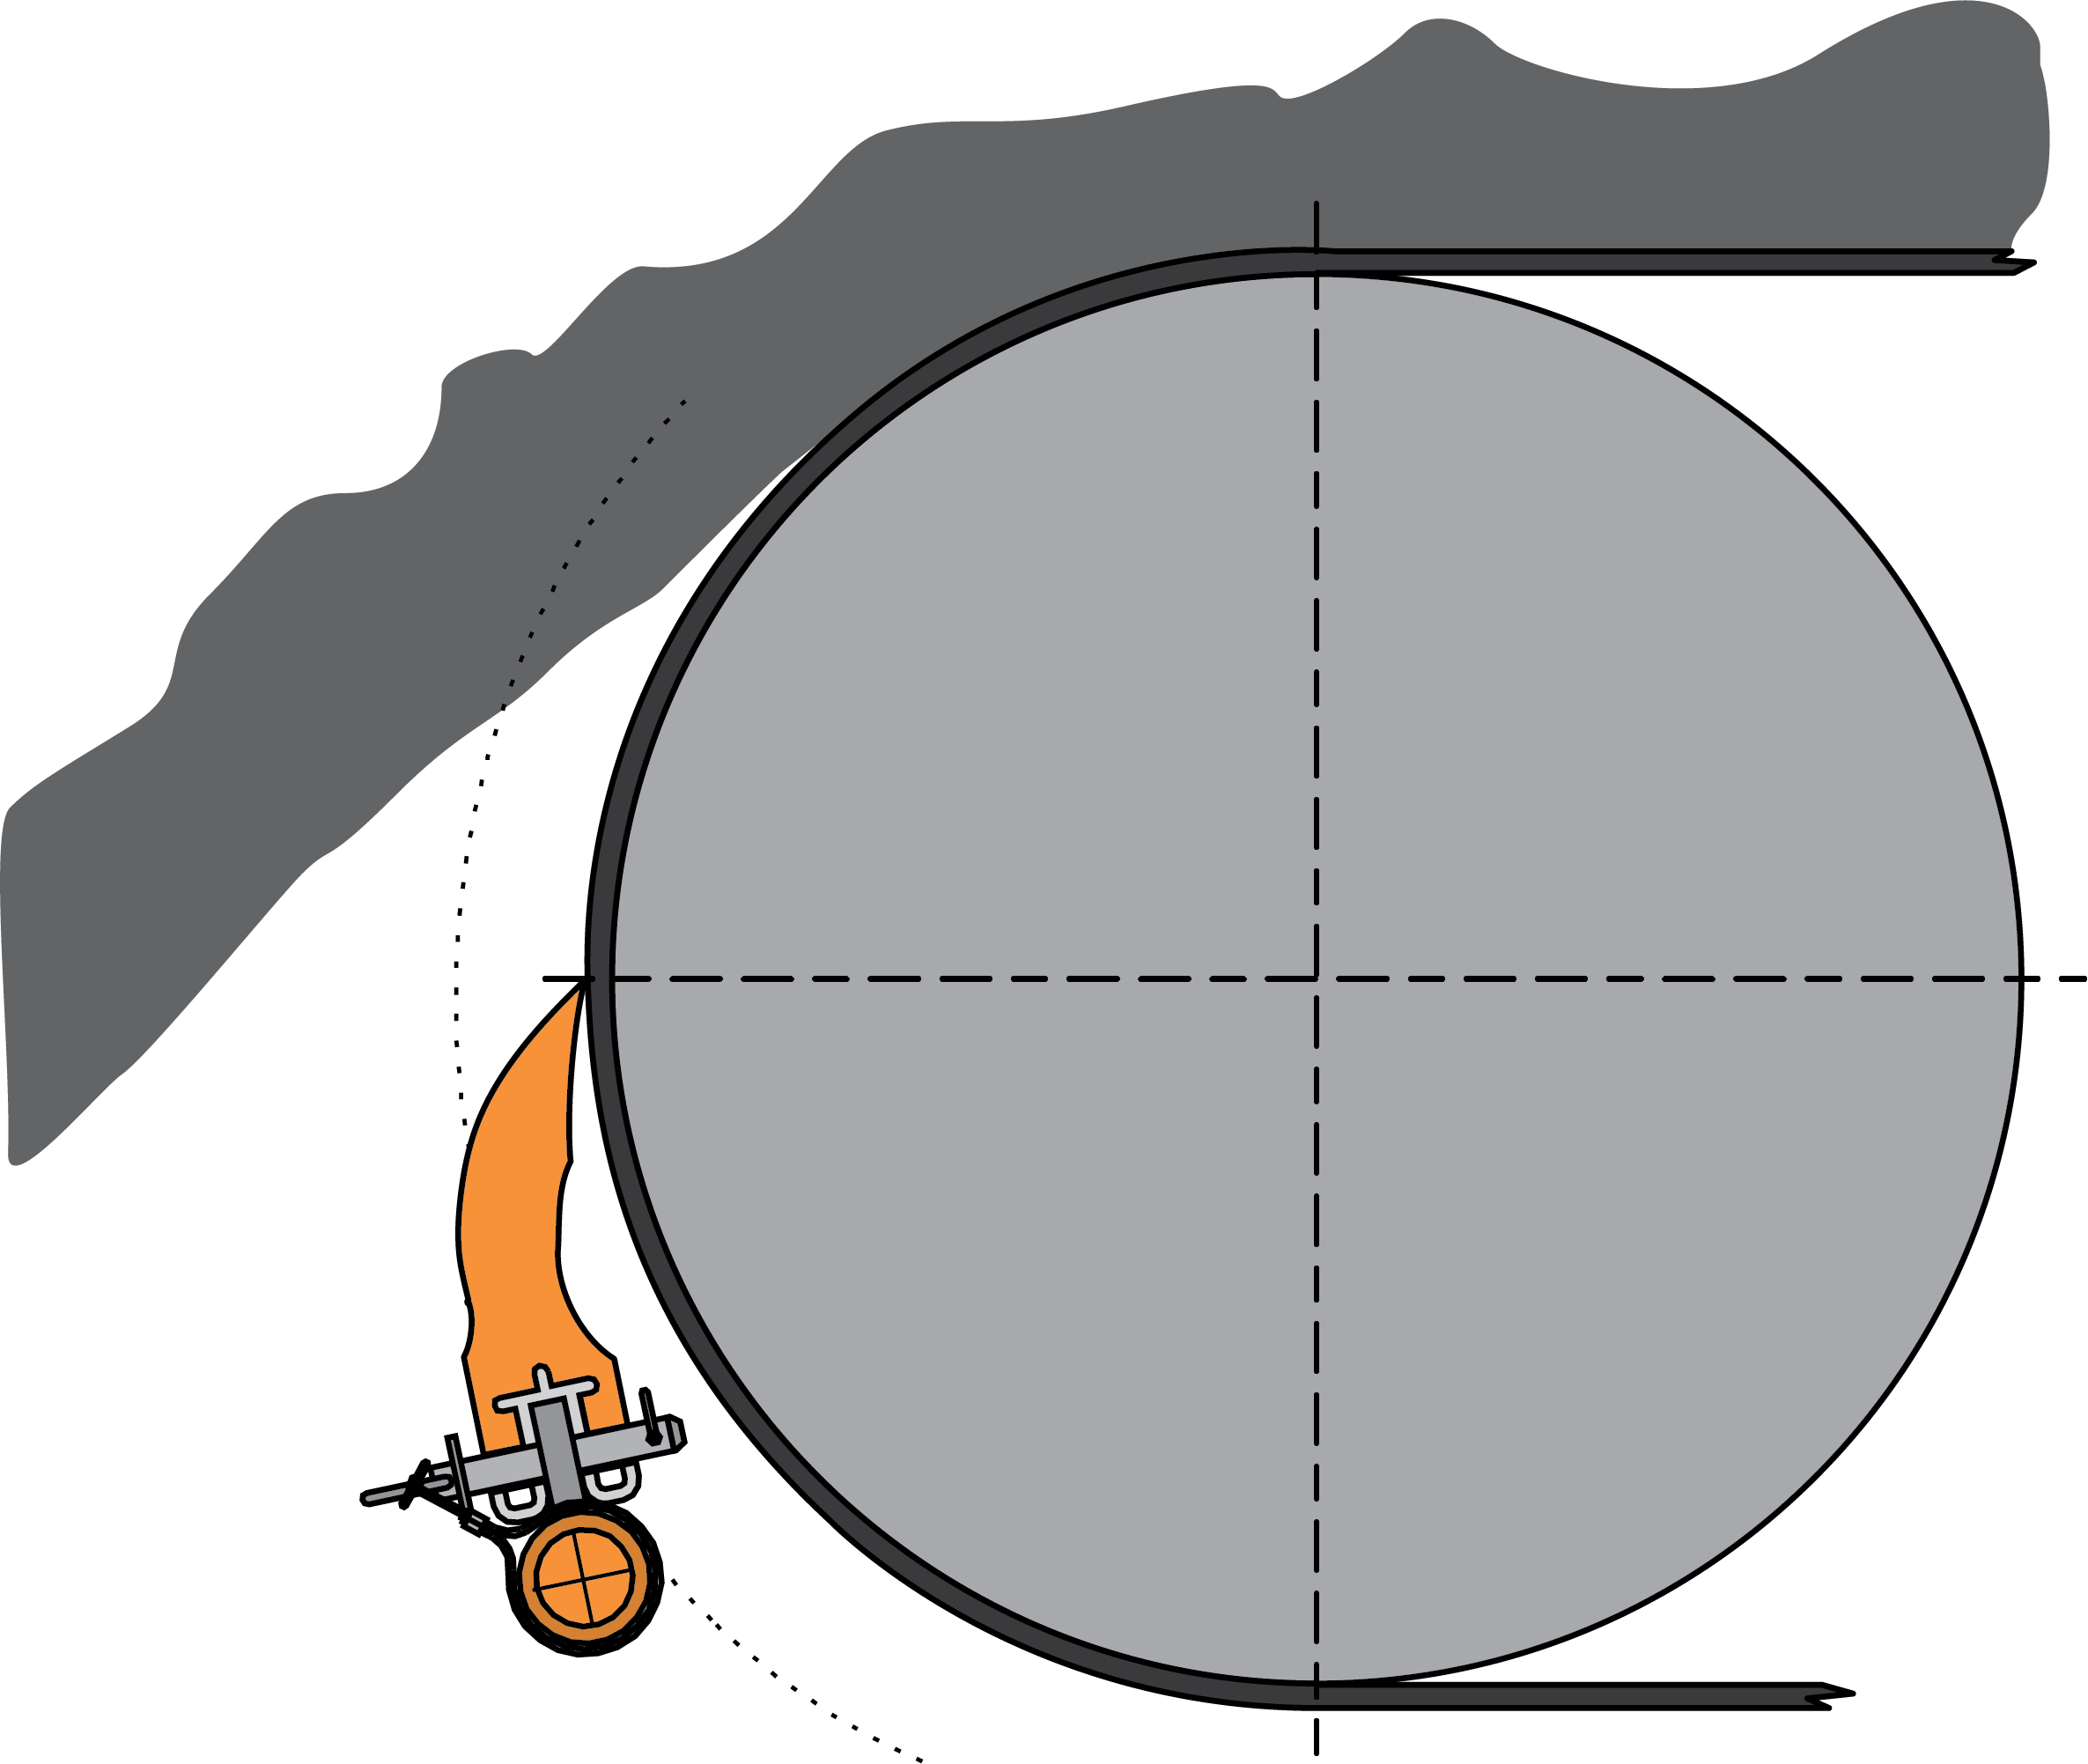 A 2-D illustration showing a pre-cleaner installed under the material flow of the face of the head pulley.